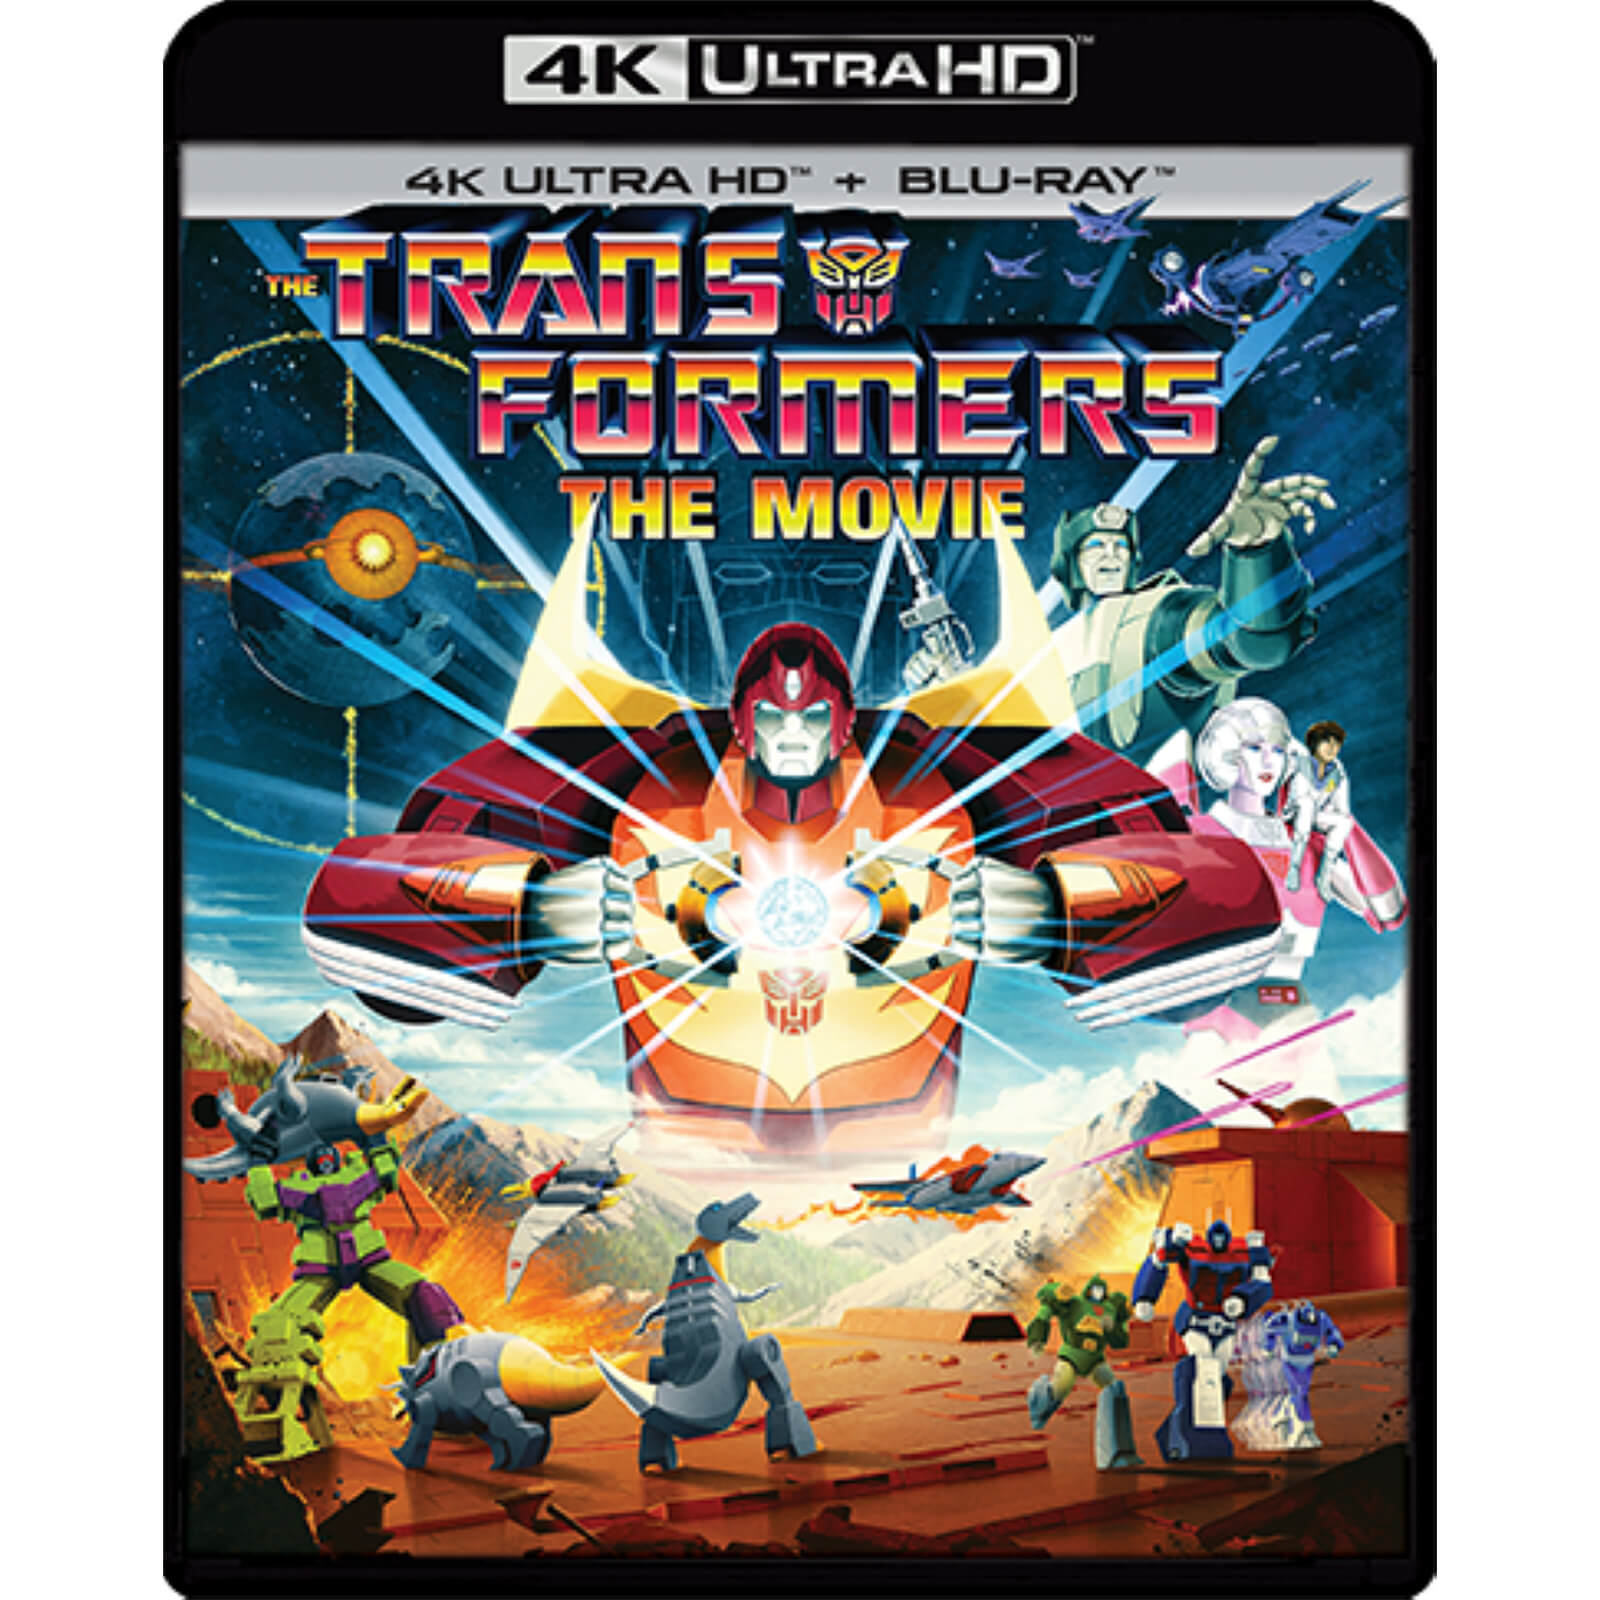 The Transformers: The Movie -35th Anniversary Limited Edition 4K Ultra HD (Includes Blu-ray)